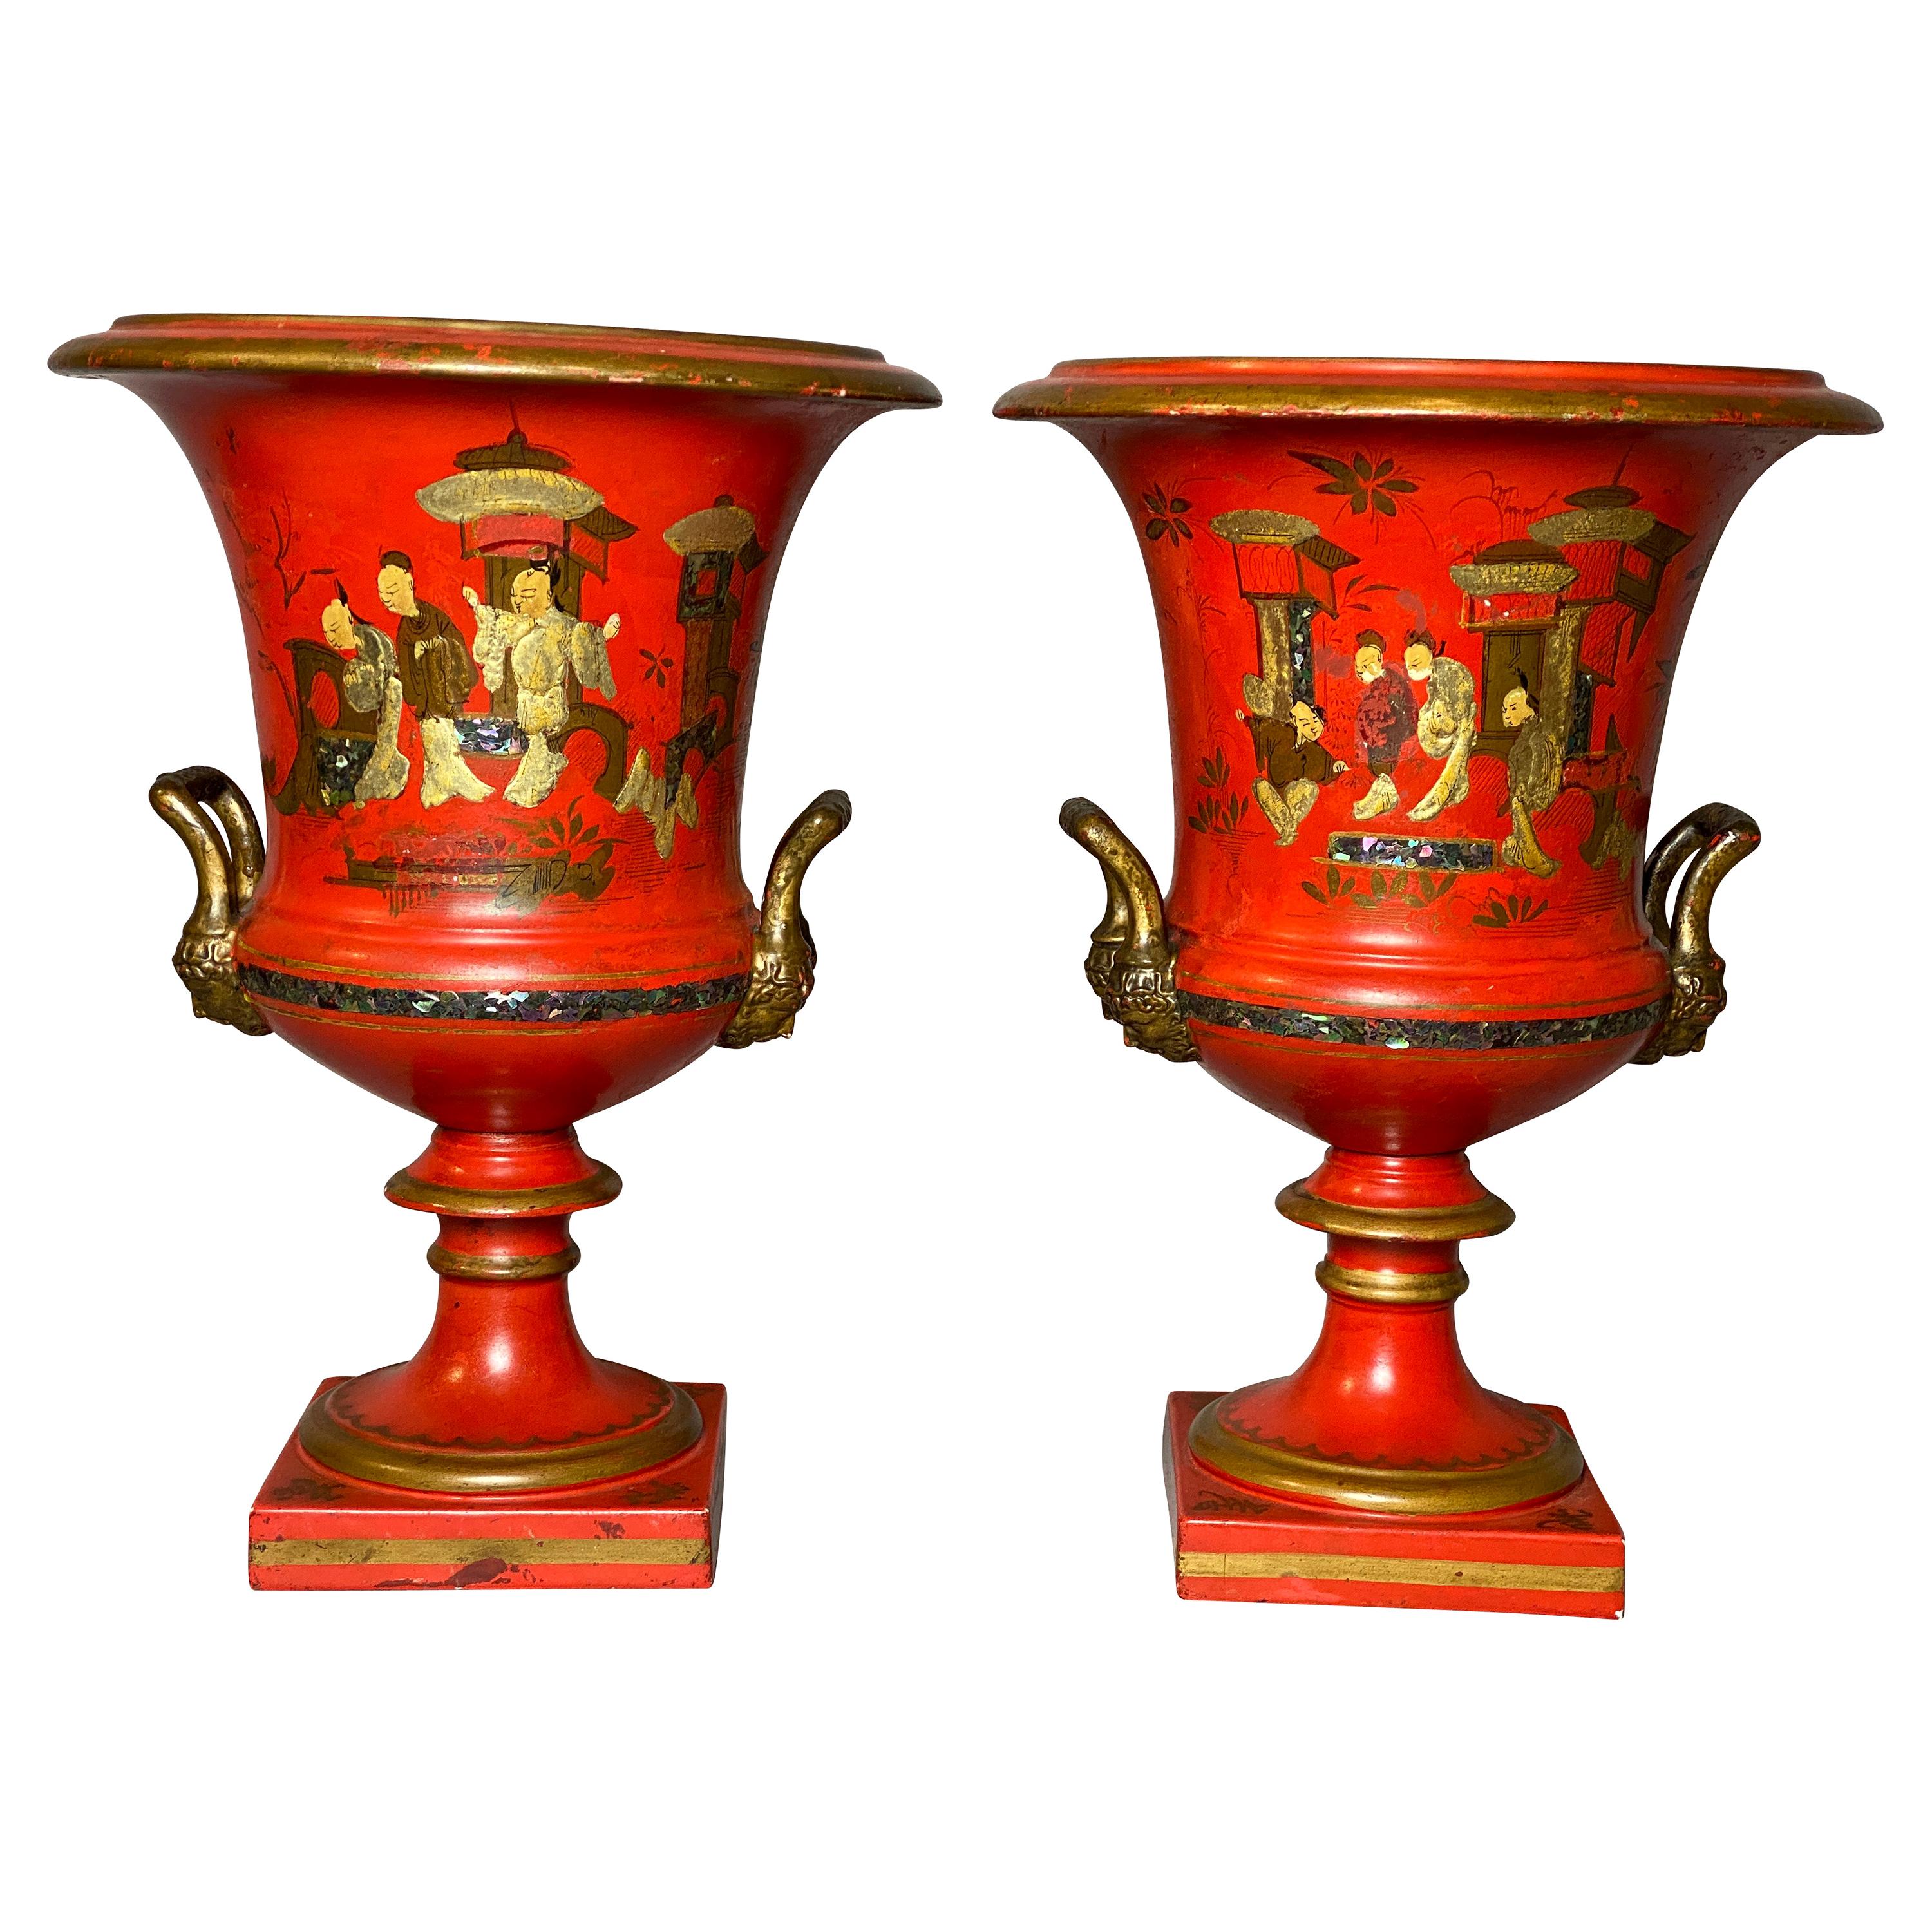 Pair of French Porcelain Campagna Vases with Later Japanned Decoration